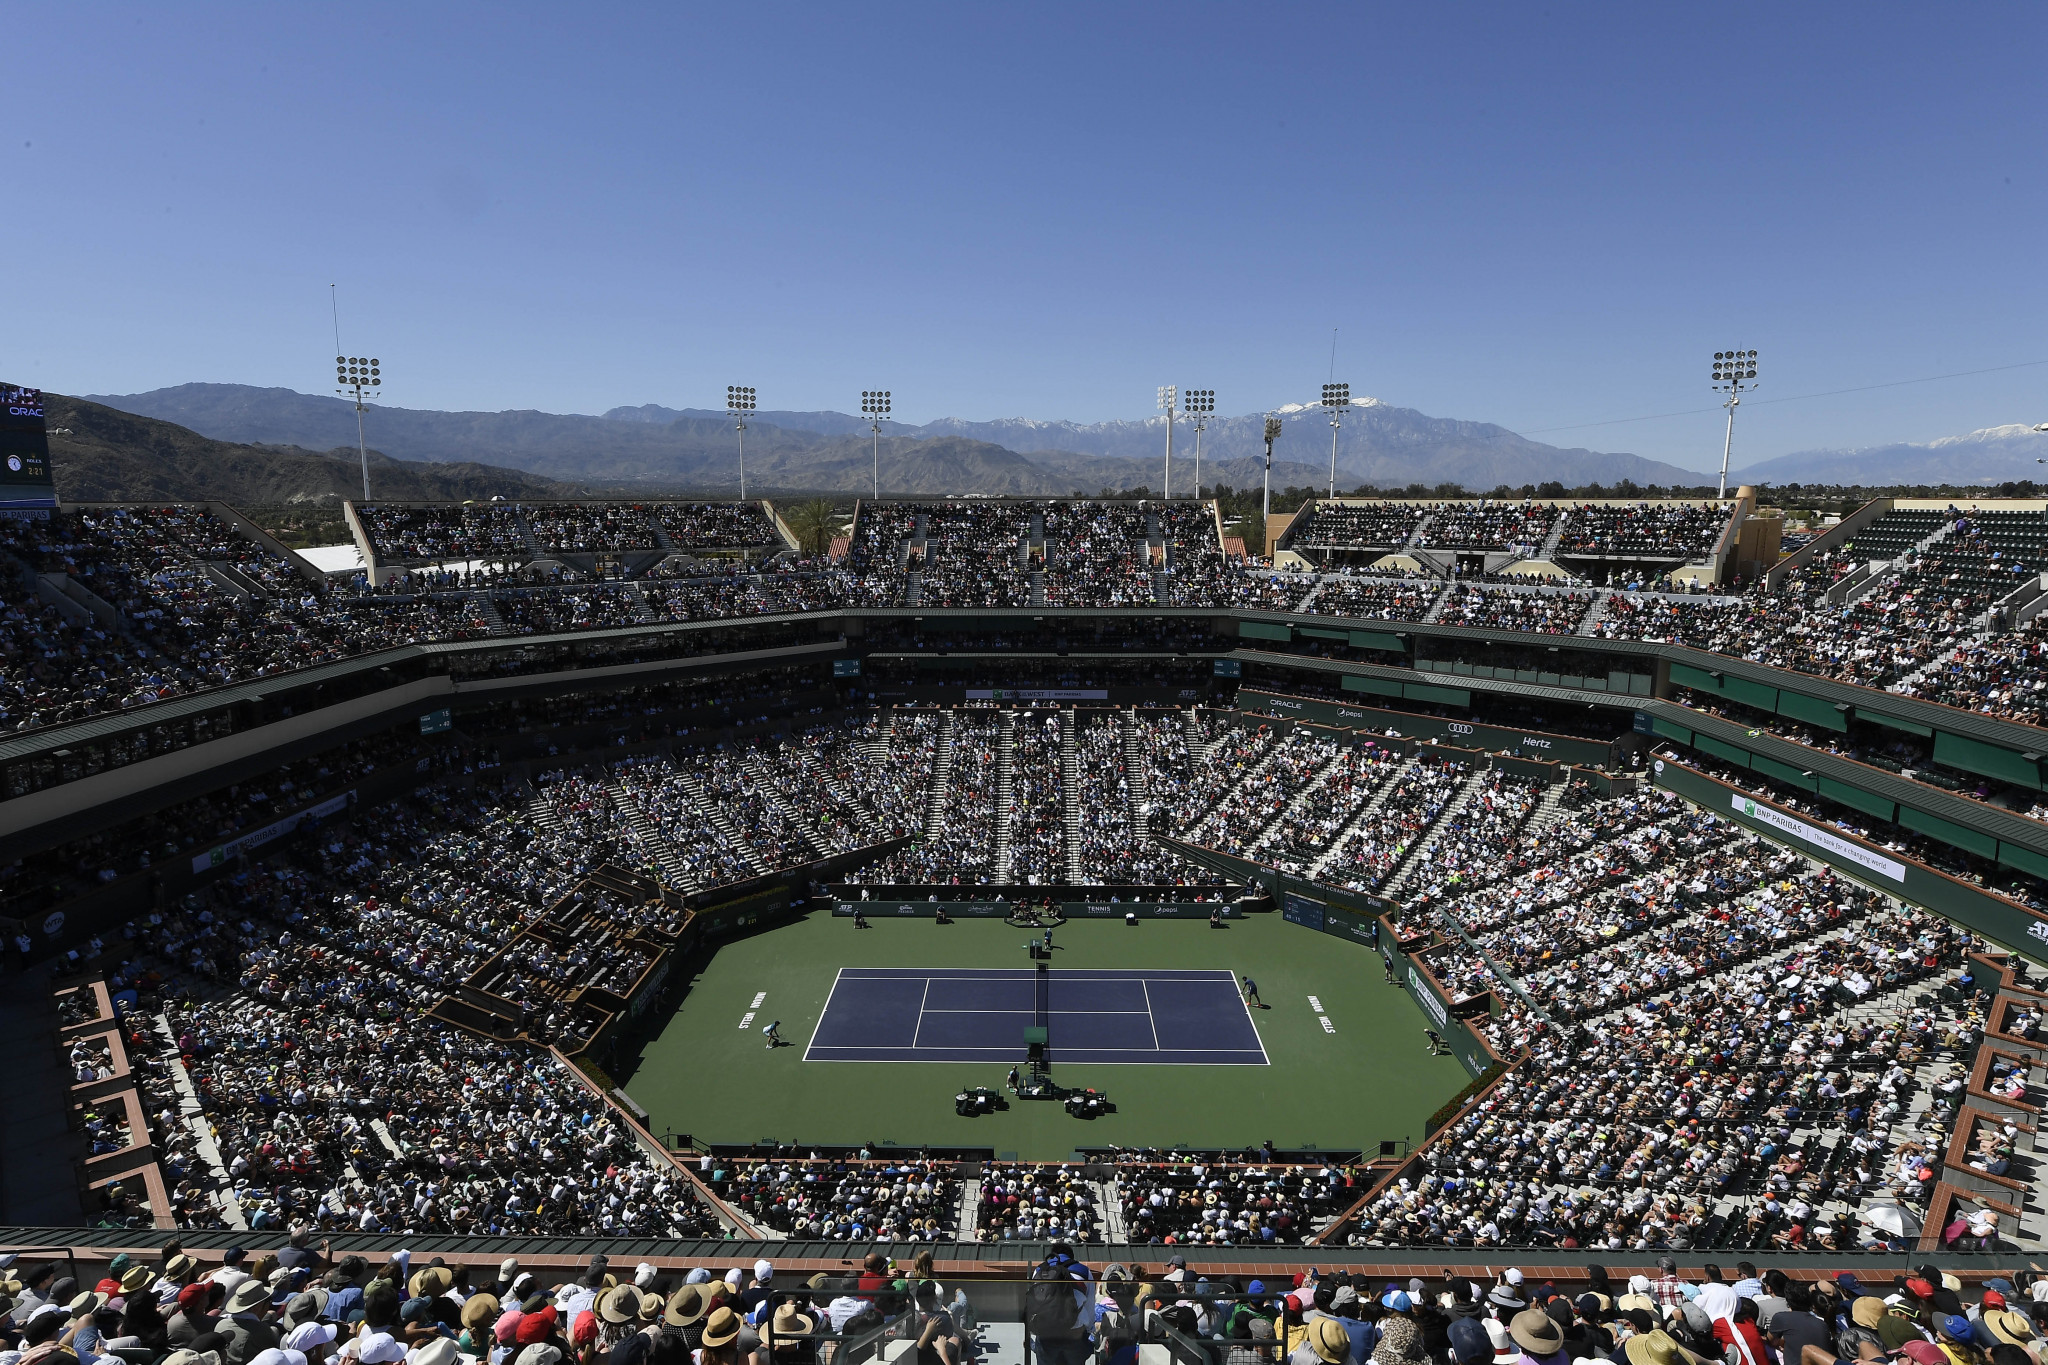 Proof of vaccination against COVID-19 is due to be required for entry into the Indian Wells Tennis Garden ©Getty Images